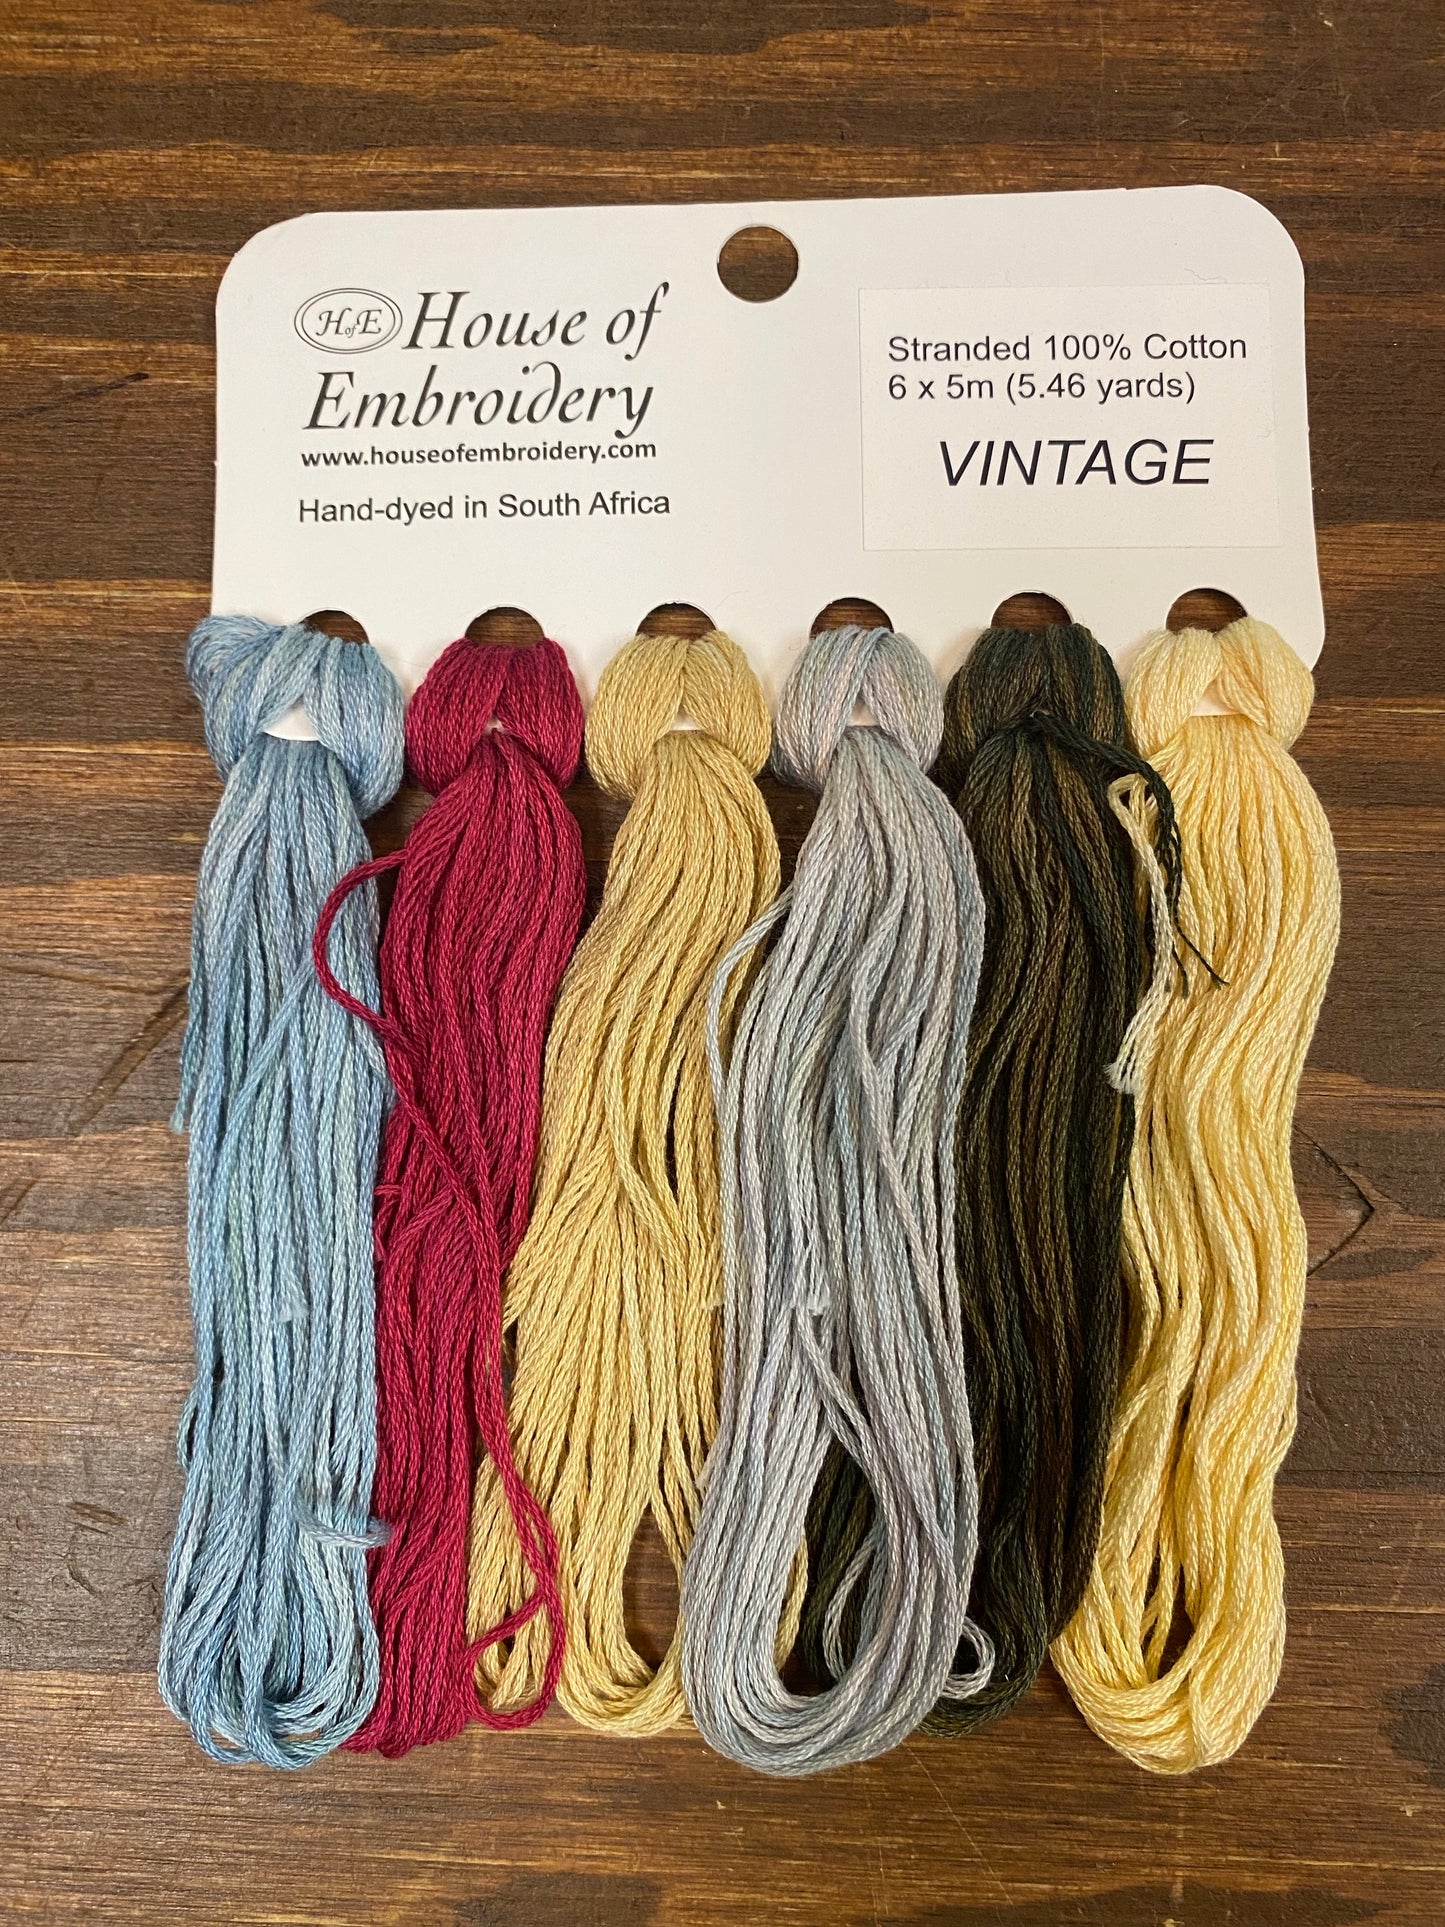 VINTAGE, 6x5m Variety Pack, Cotton Floss